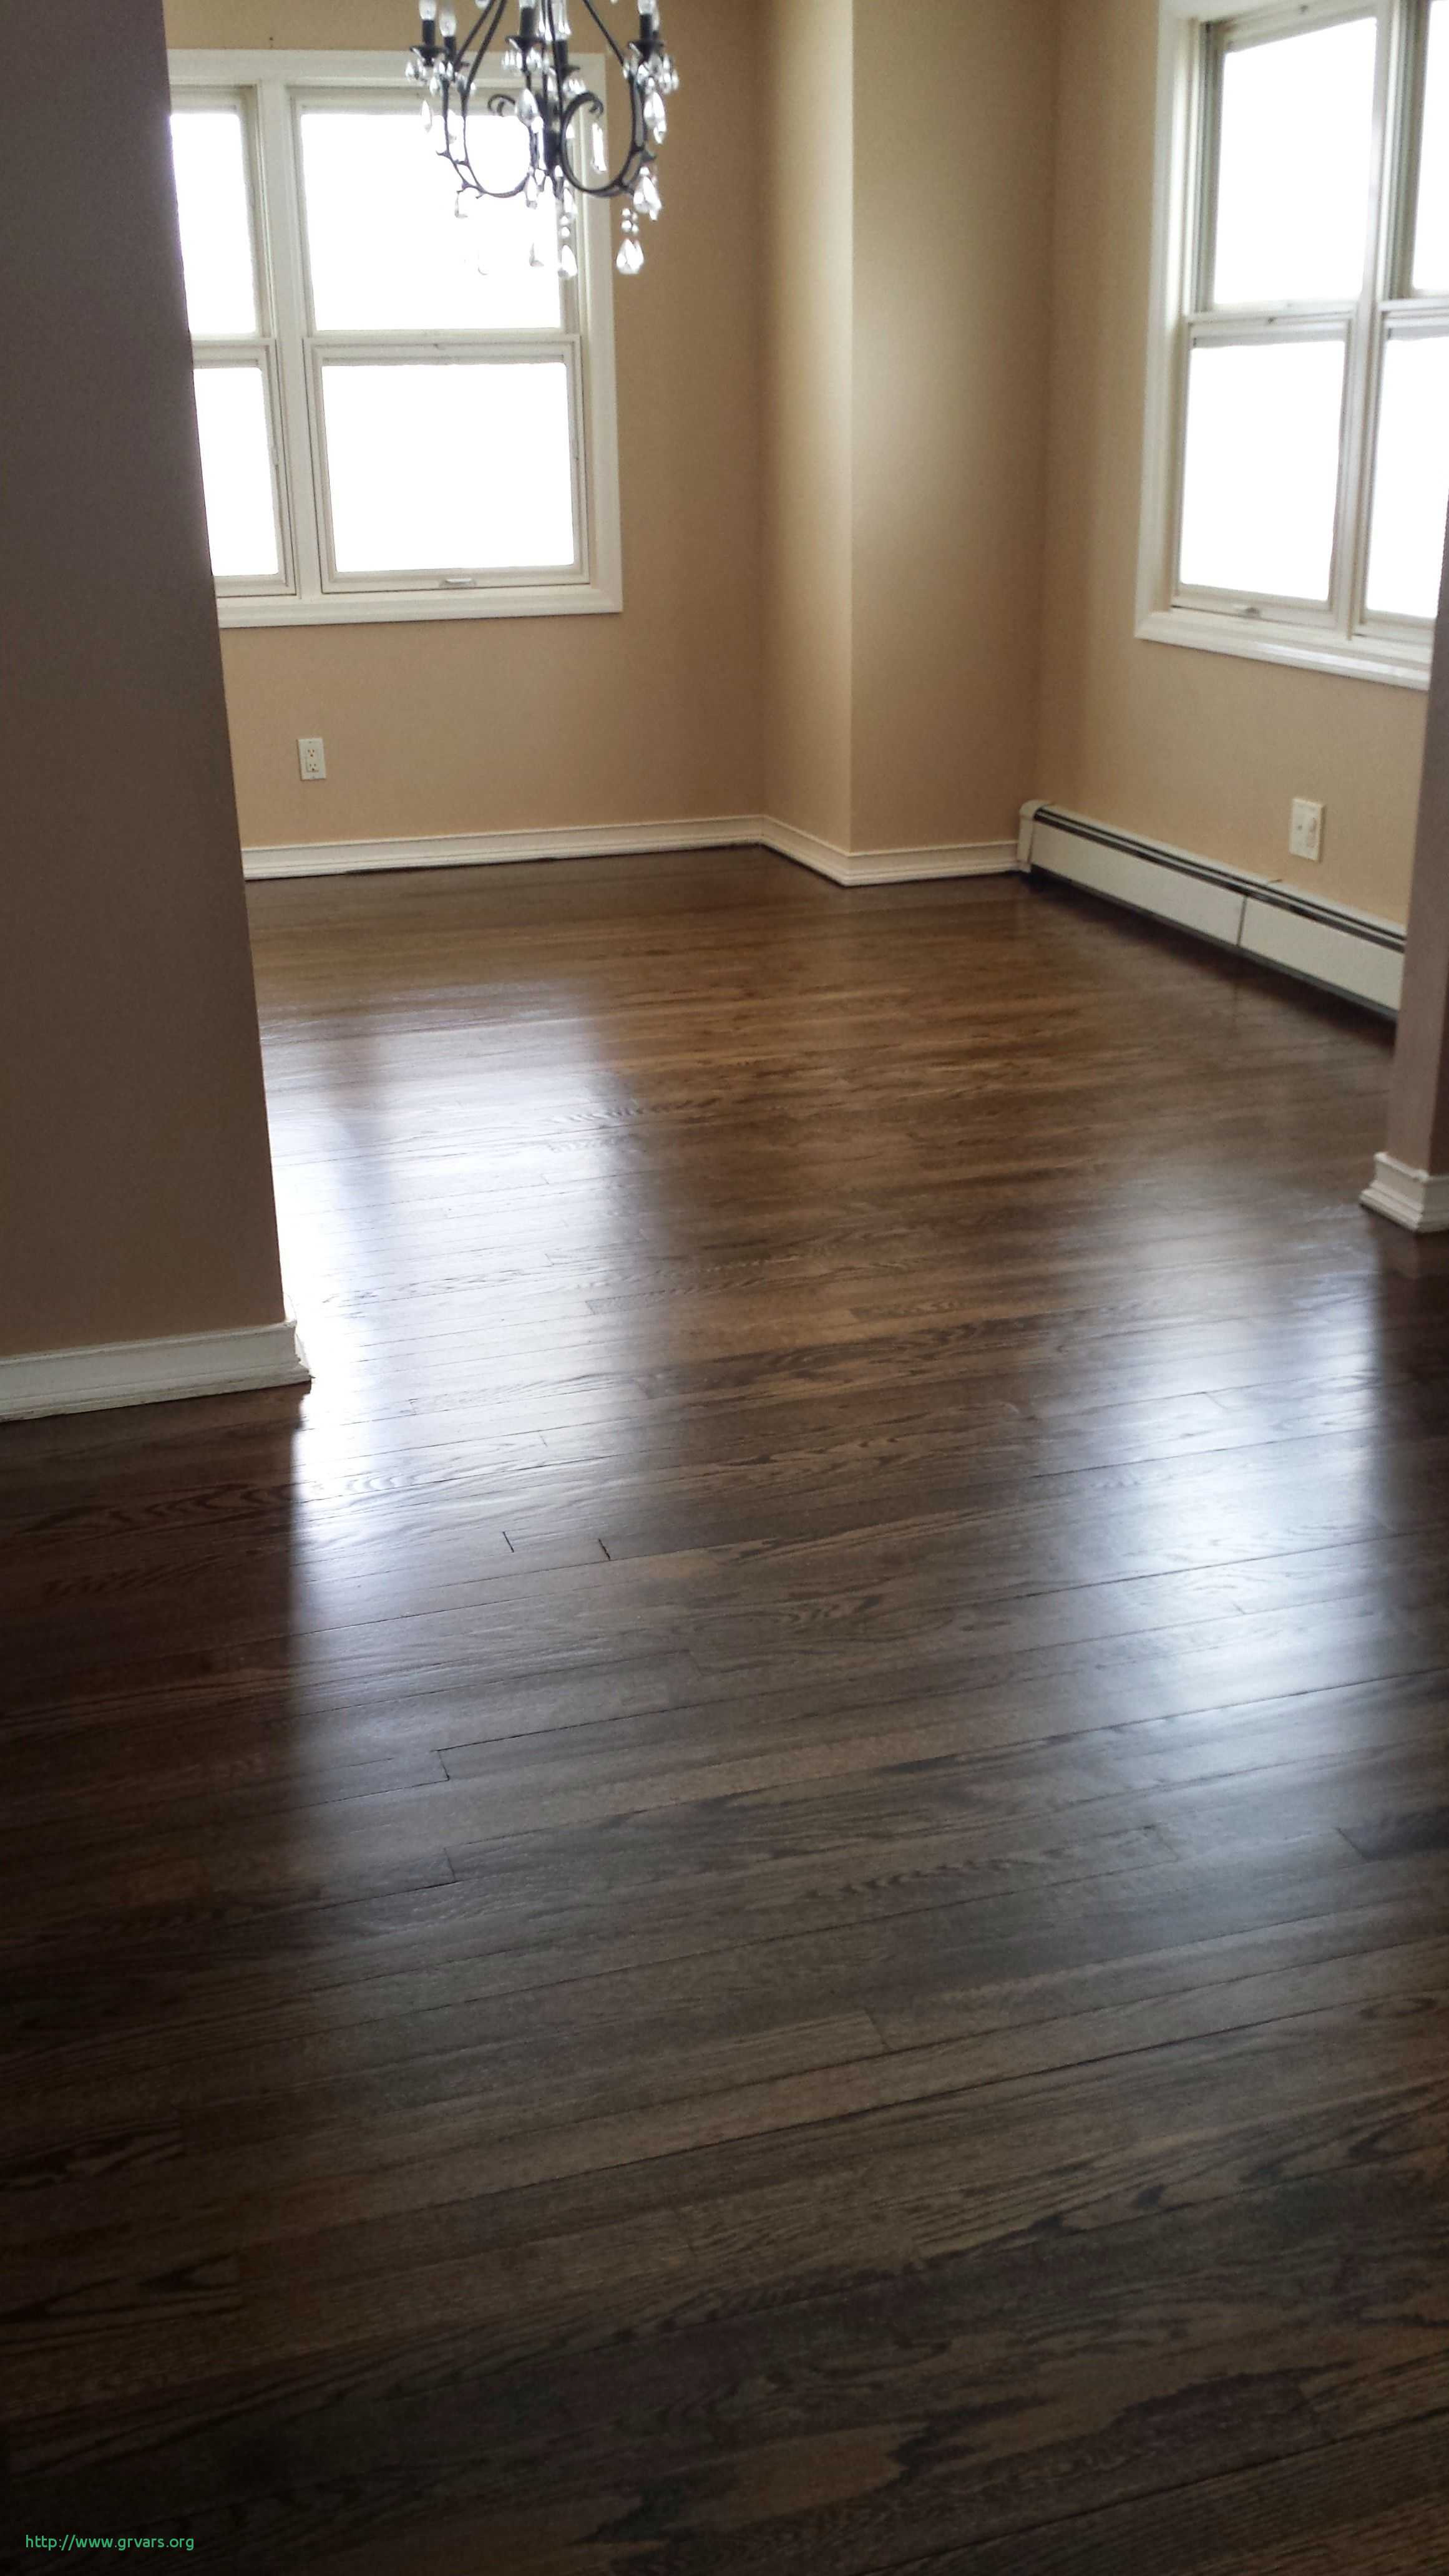 19 attractive Cost to Refinish Hardwood Floors Seattle 2024 free download cost to refinish hardwood floors seattle of 25 nouveau hardwood floor buffers for home use ideas blog throughout interior amusing refinishingod floors diy network refinish parquet without sa